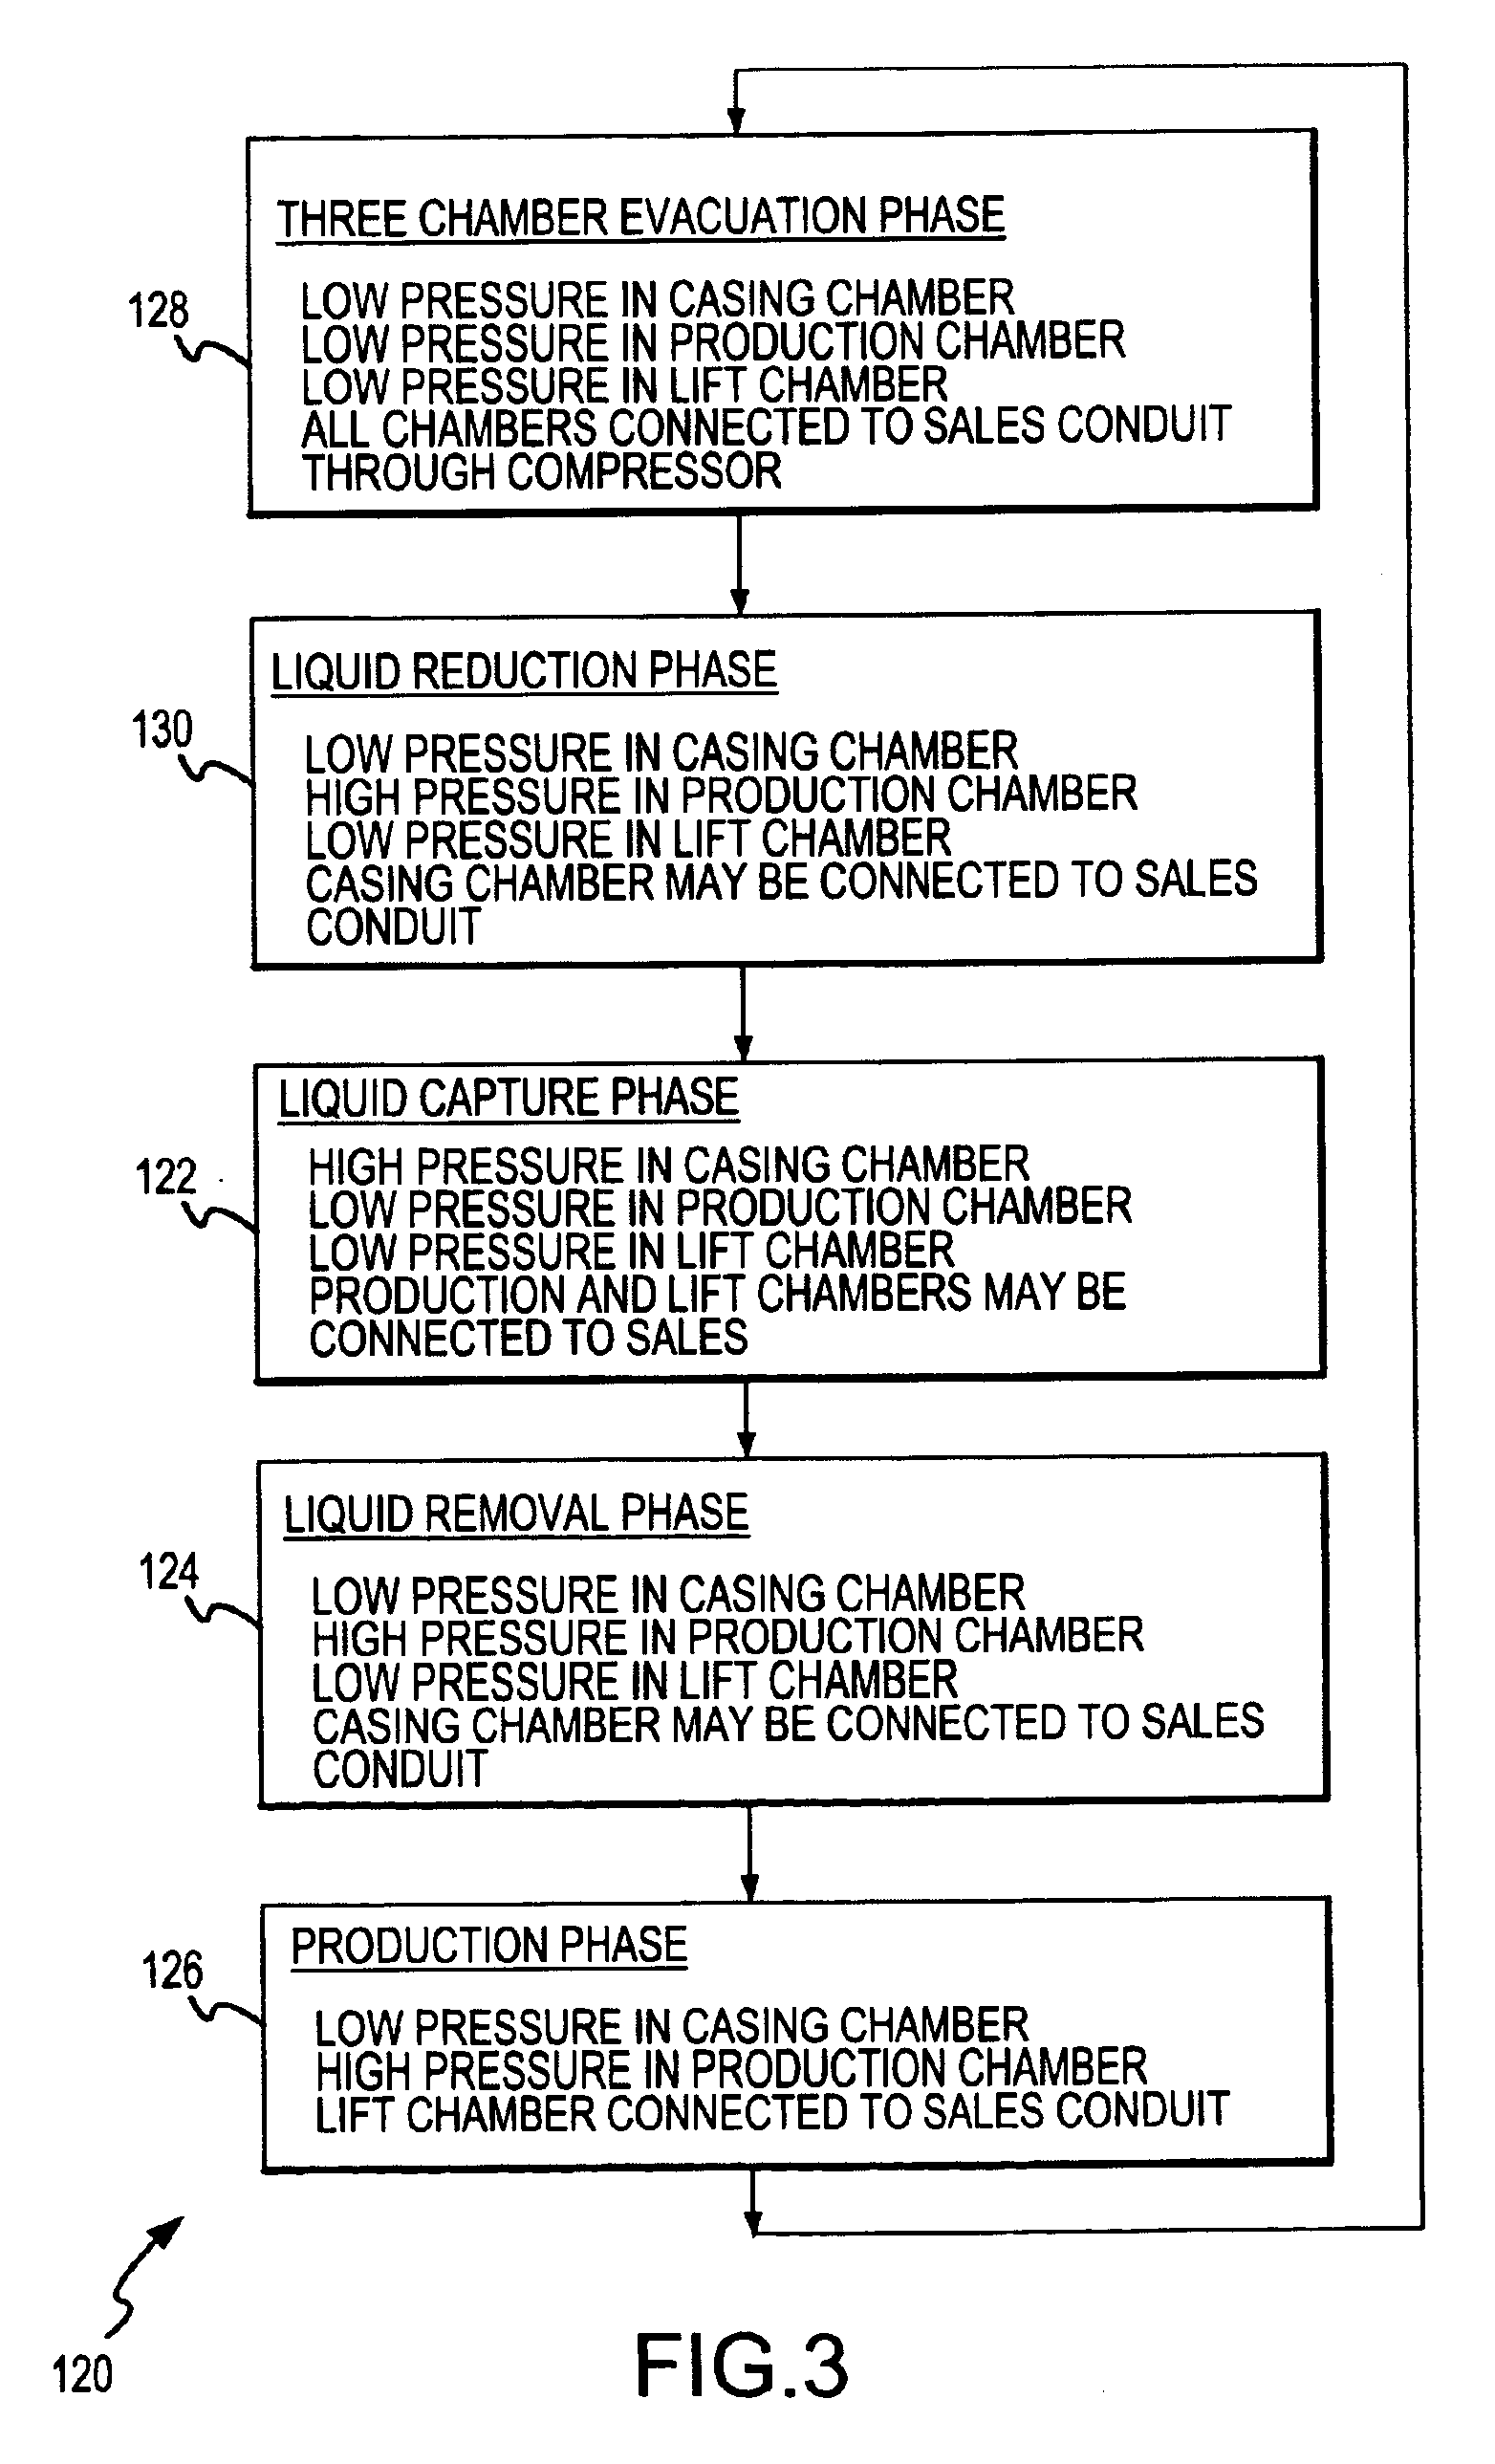 Gas recovery apparatus, method and cycle having a three chamber evacuation phase and two liquid extraction phases for improved natural gas production